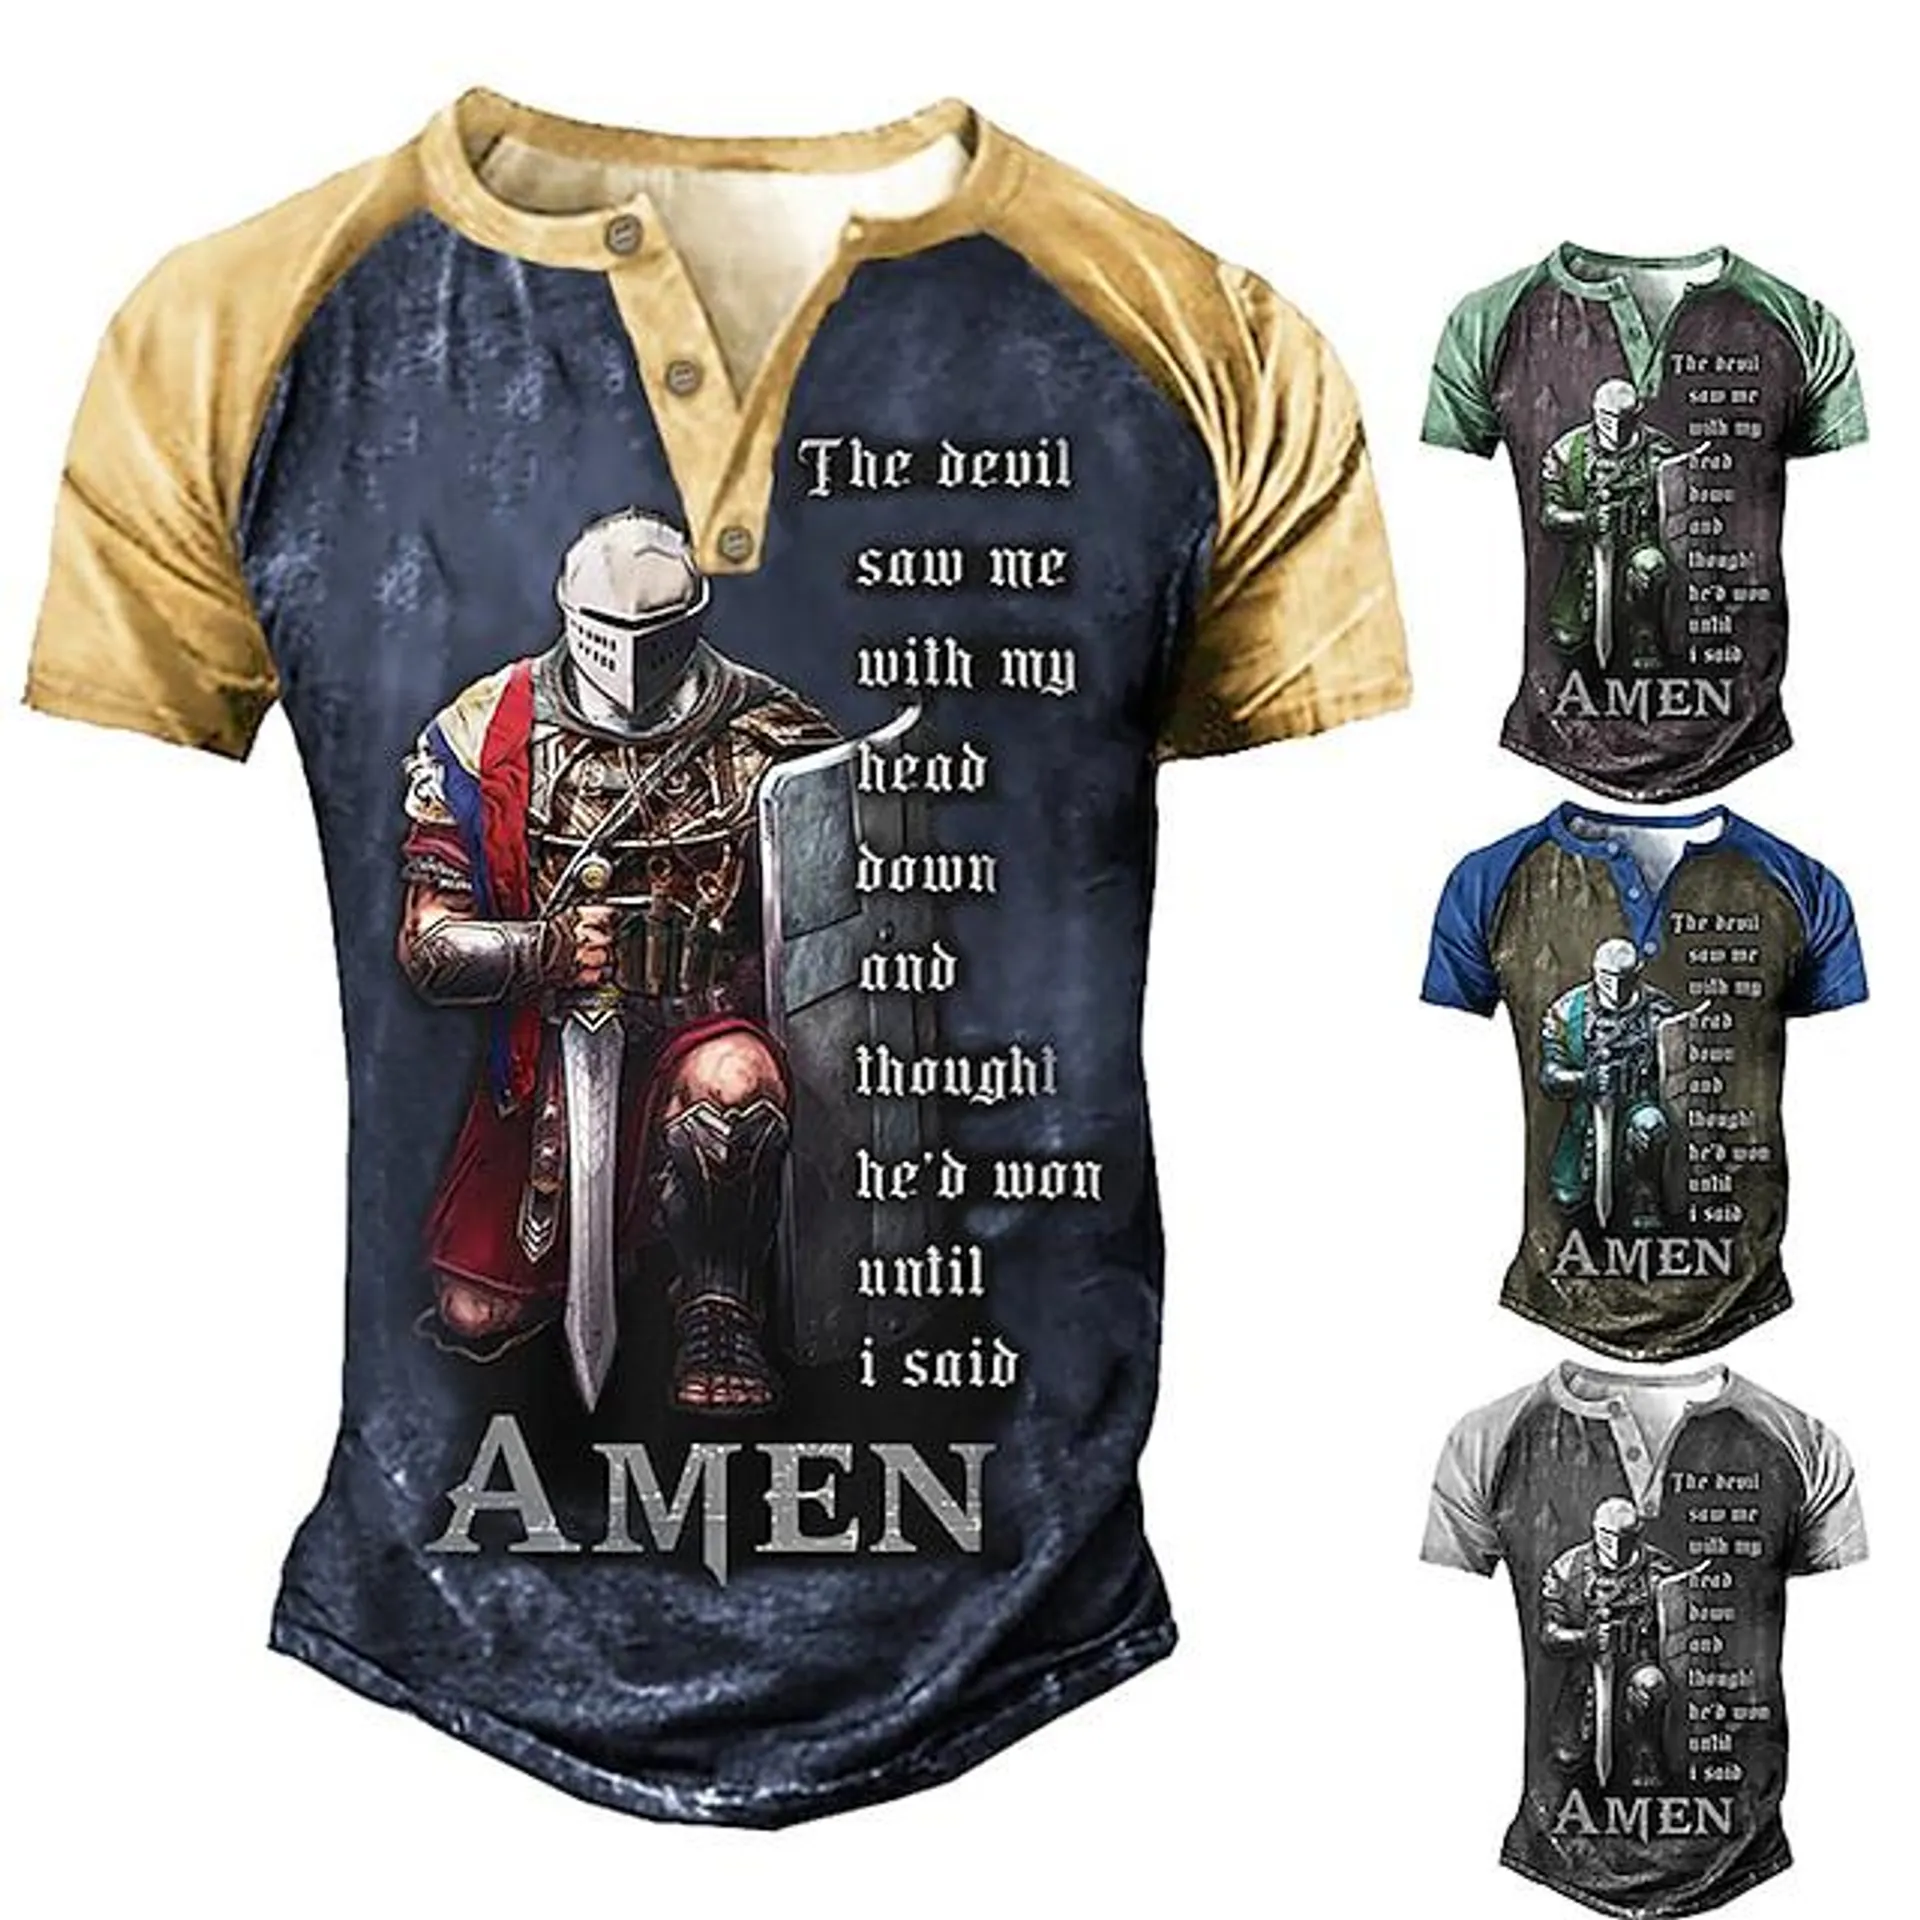 Men's Henley Shirt T shirt Tee Graphic Tees Templar Cross Soldier Henley Green Black Blue Navy Blue Coffee 3D Print Plus Size Outdoor Daily Short Sleeve Patchwork Button-Down Clothing Apparel Basic